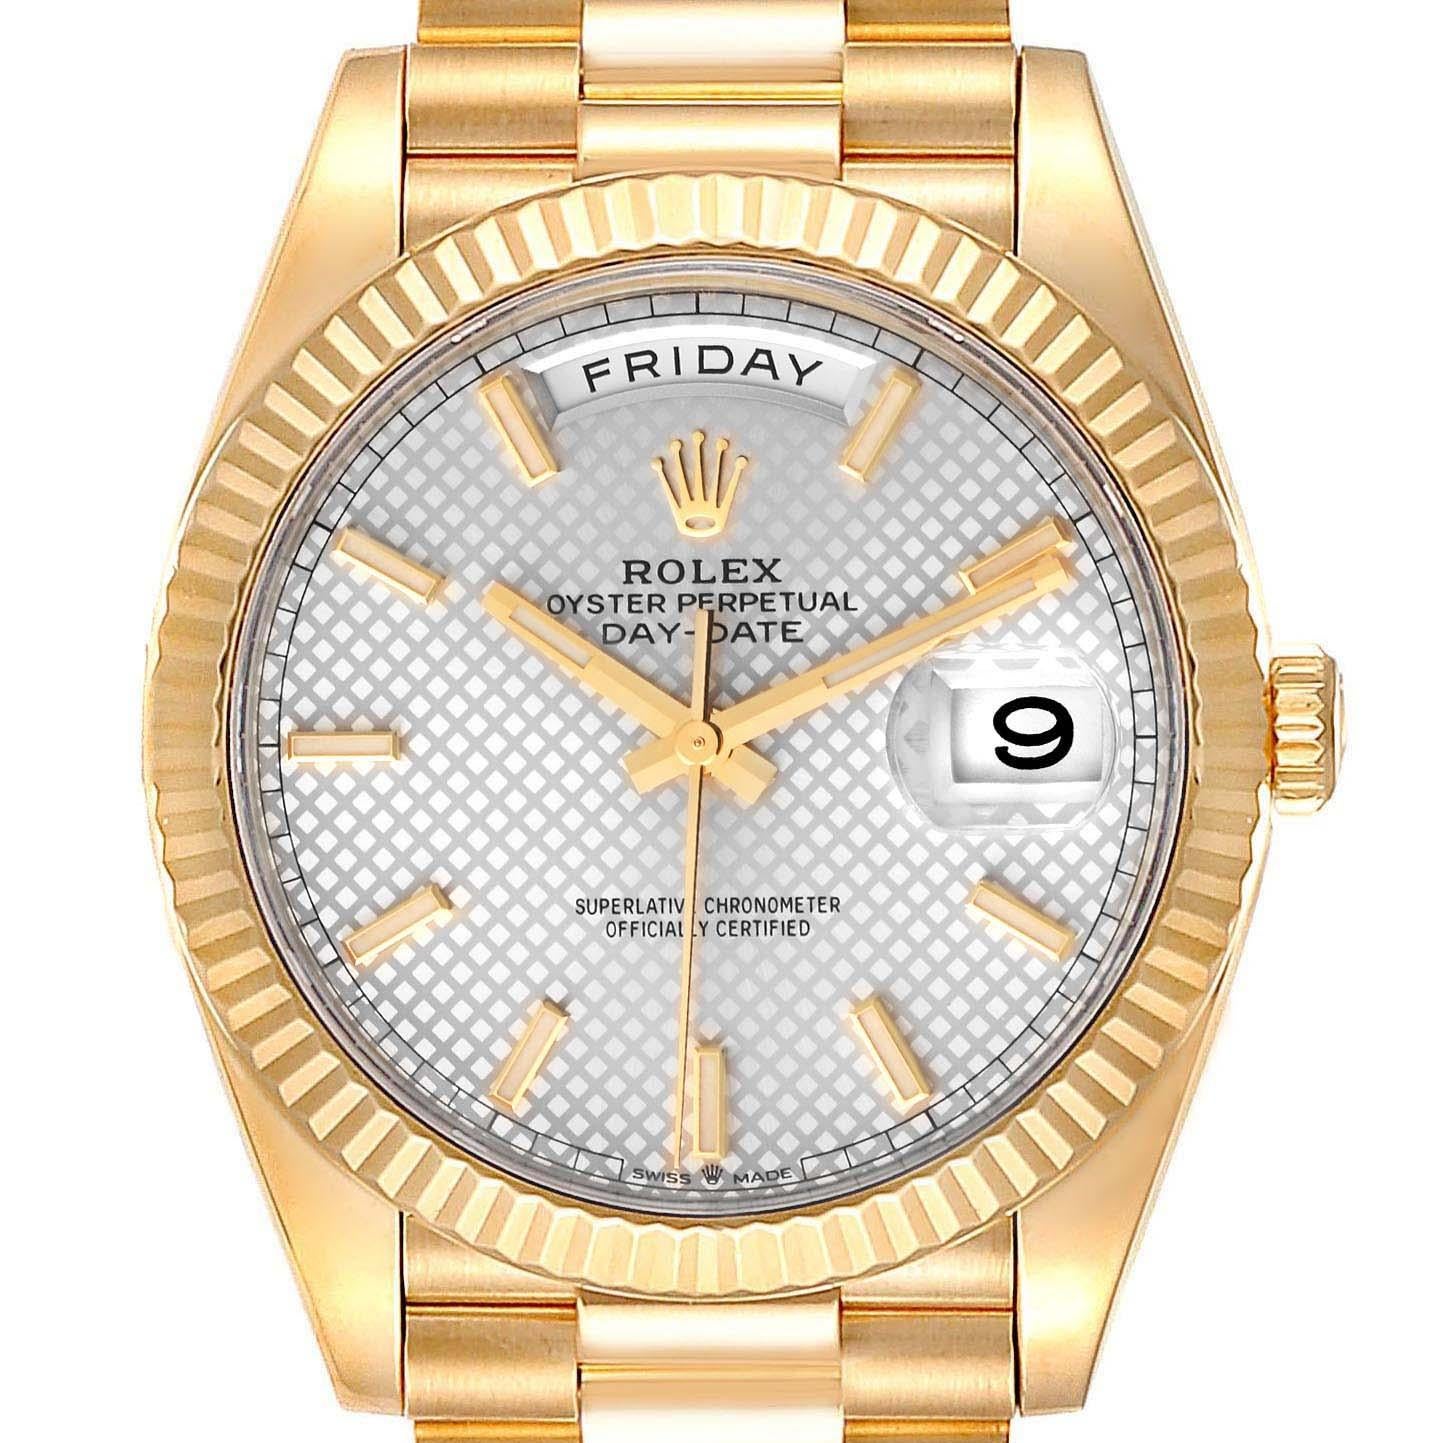 Rolex President Day-Date 40mm 18K Yellow Gold Mens Watch 228238 Unworn. Officially certified chronometer self-winding movement. Double quick set function. 18k yellow gold oyster case 40.0 mm in diameter. Rolex logo on a crown. 18K yellow gold fluted